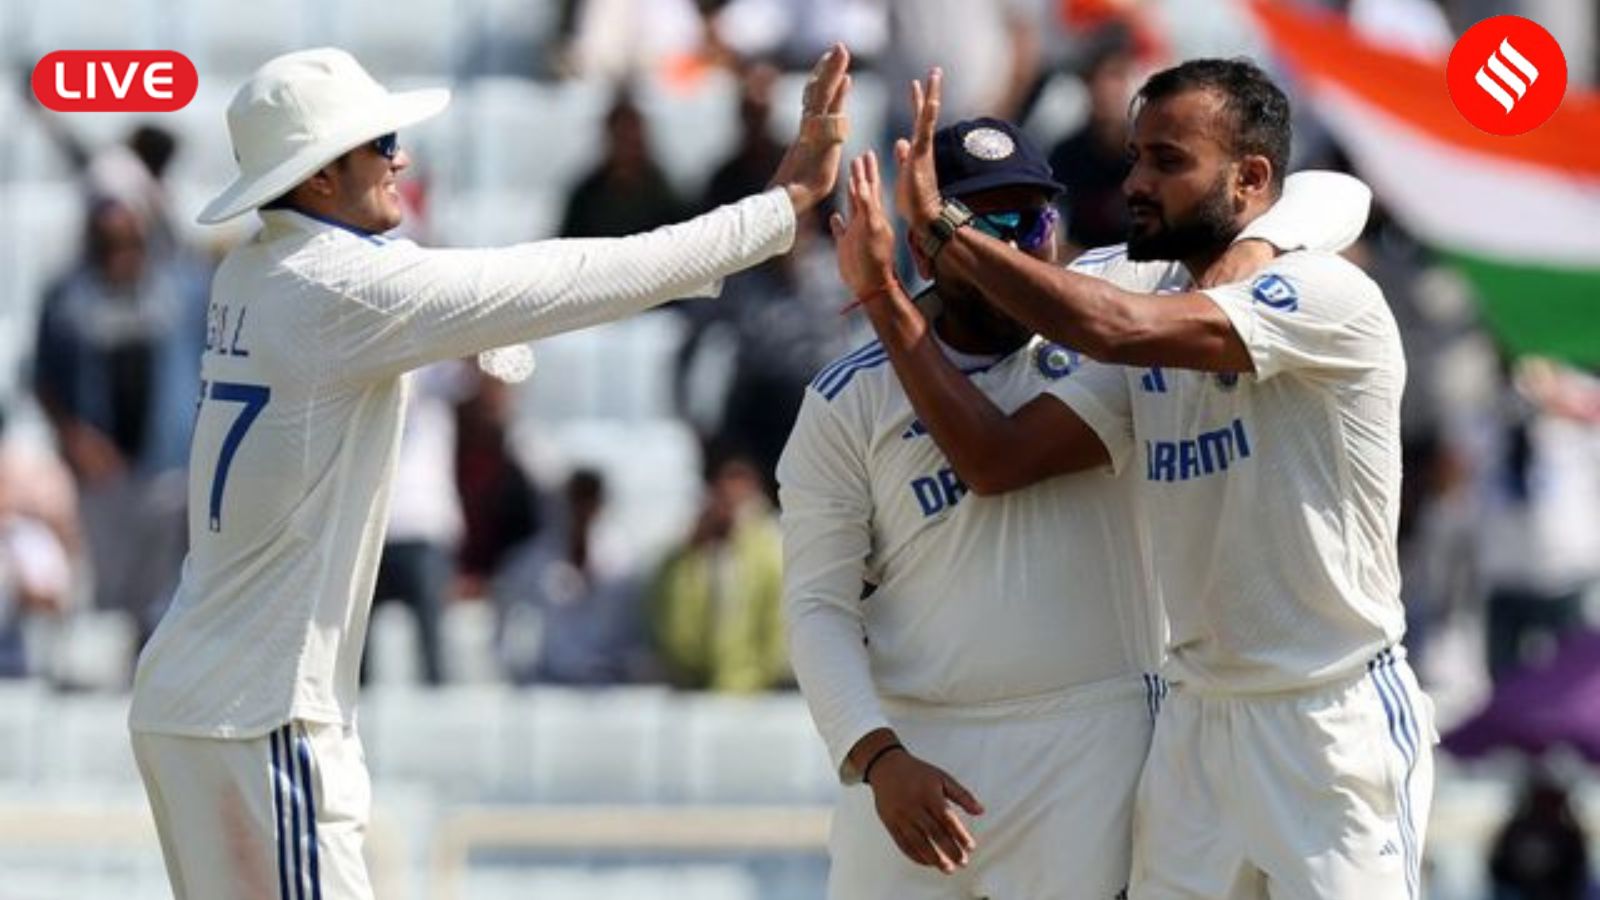 India vs England Live Score: Catch all the updates from IND vs ENG 4th Test Day 1 Live Cricket Score at JSCA International Stadium Complex, Ranchi